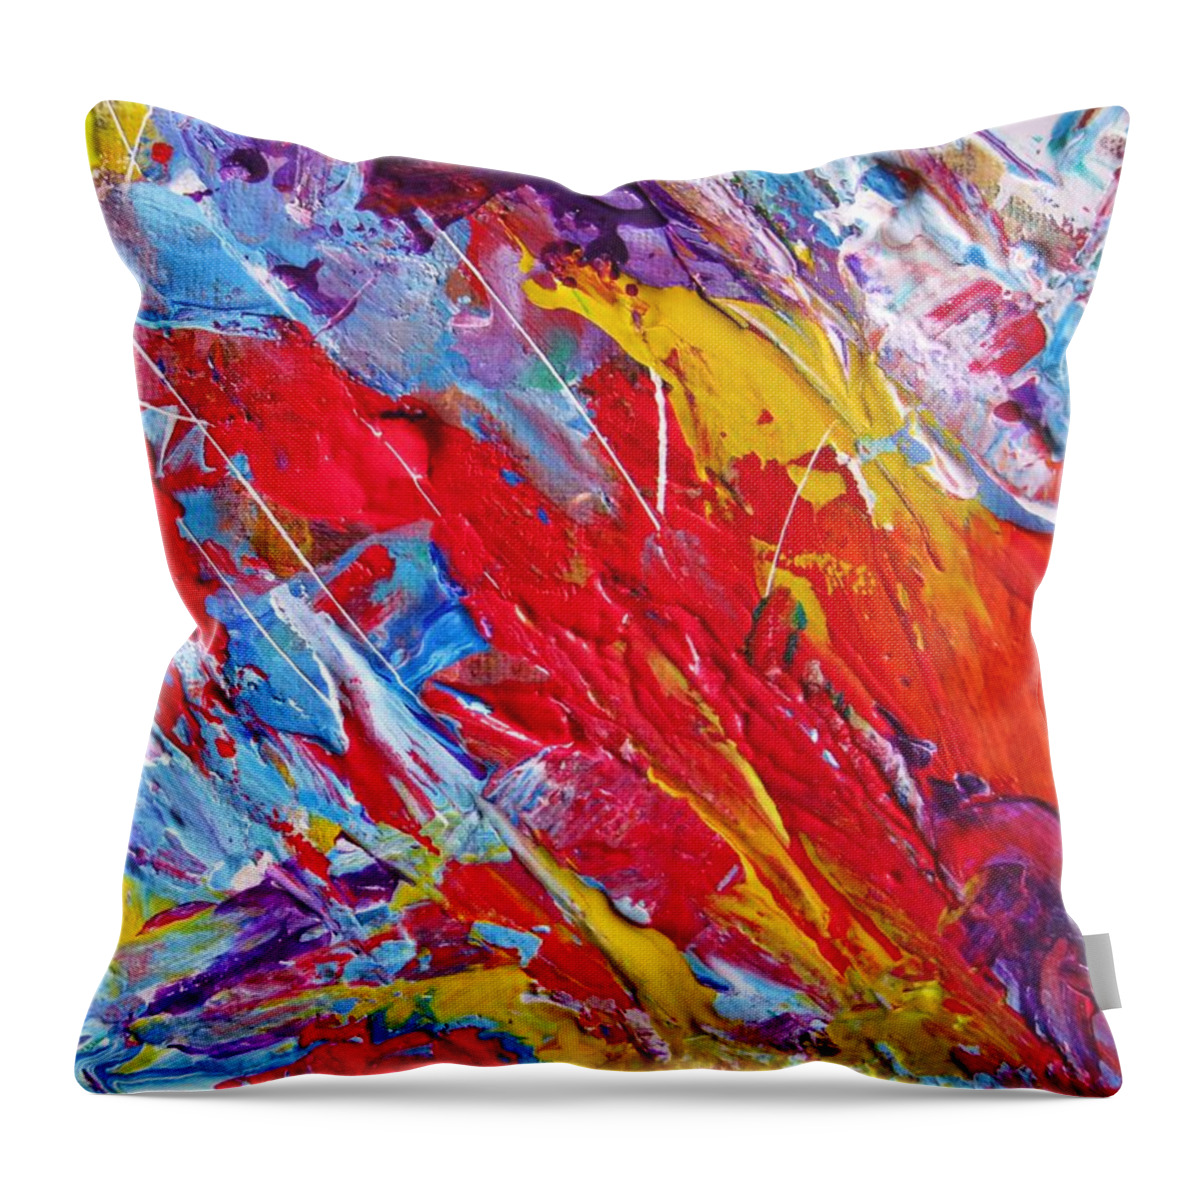 Healing Energy Spiritual Contemporary Art Throw Pillow featuring the painting Colors 19-6 by Helen Kagan